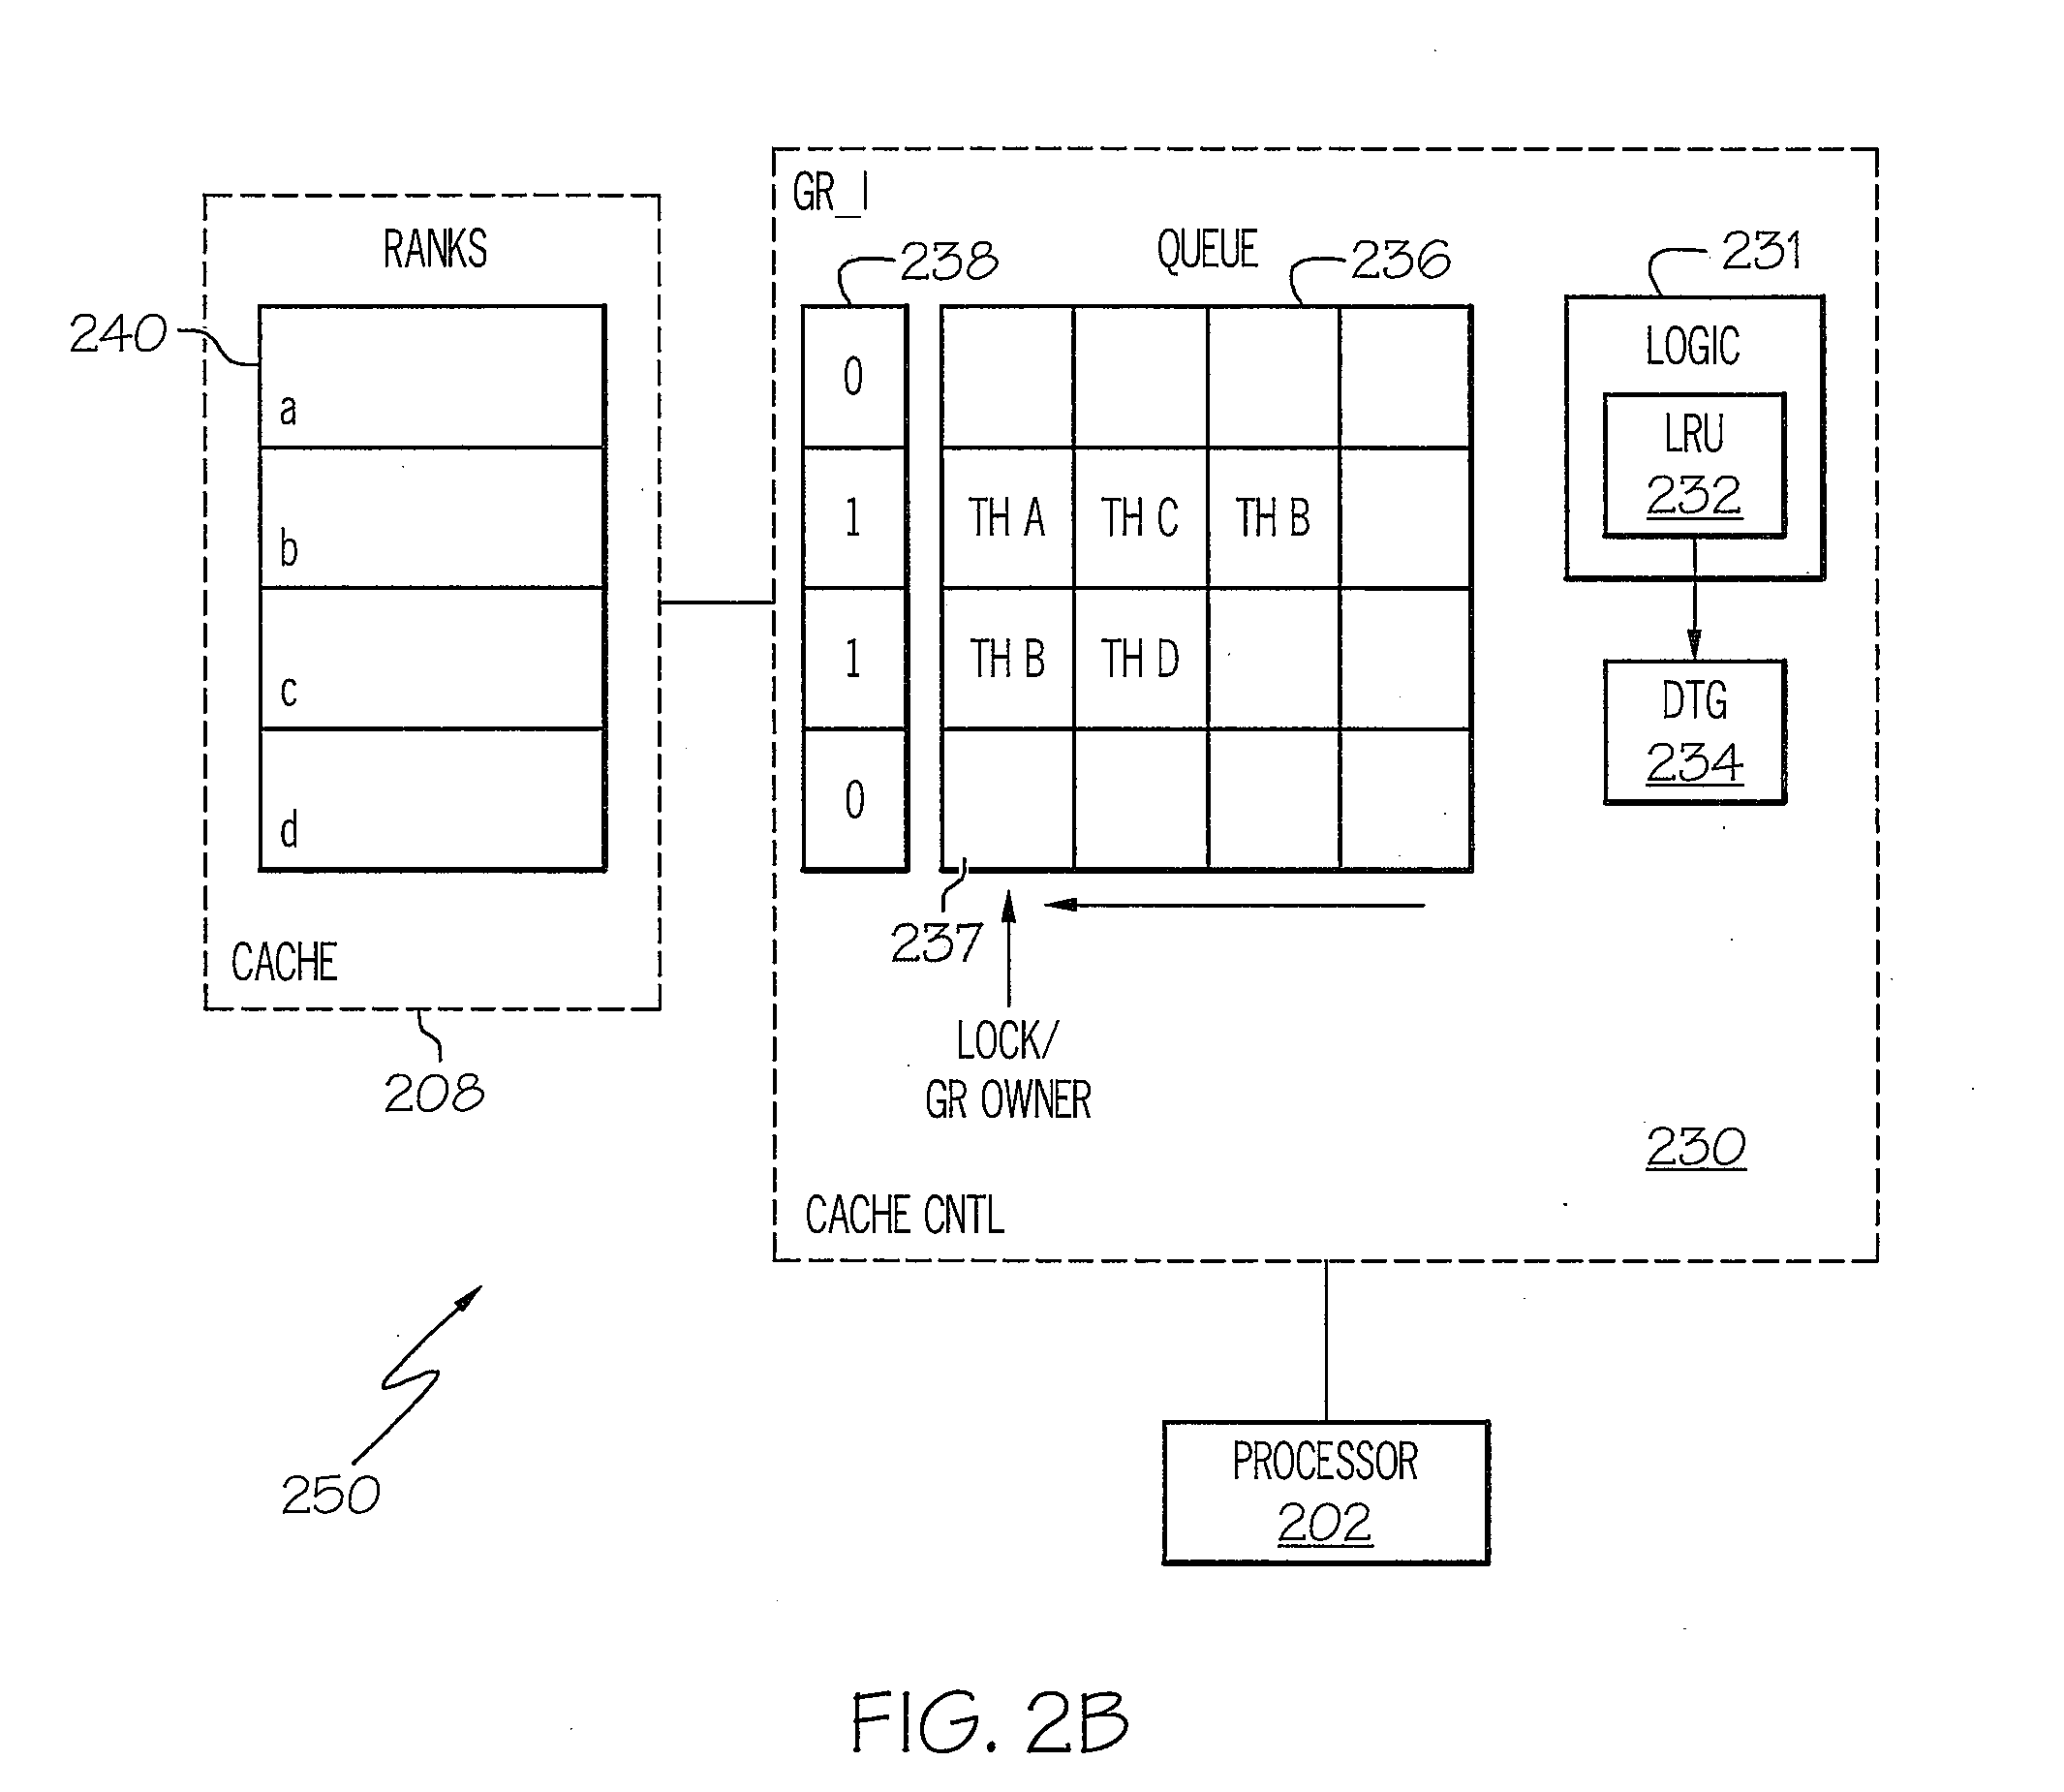 Method and system for grouping tracks for destaging on raid arrays